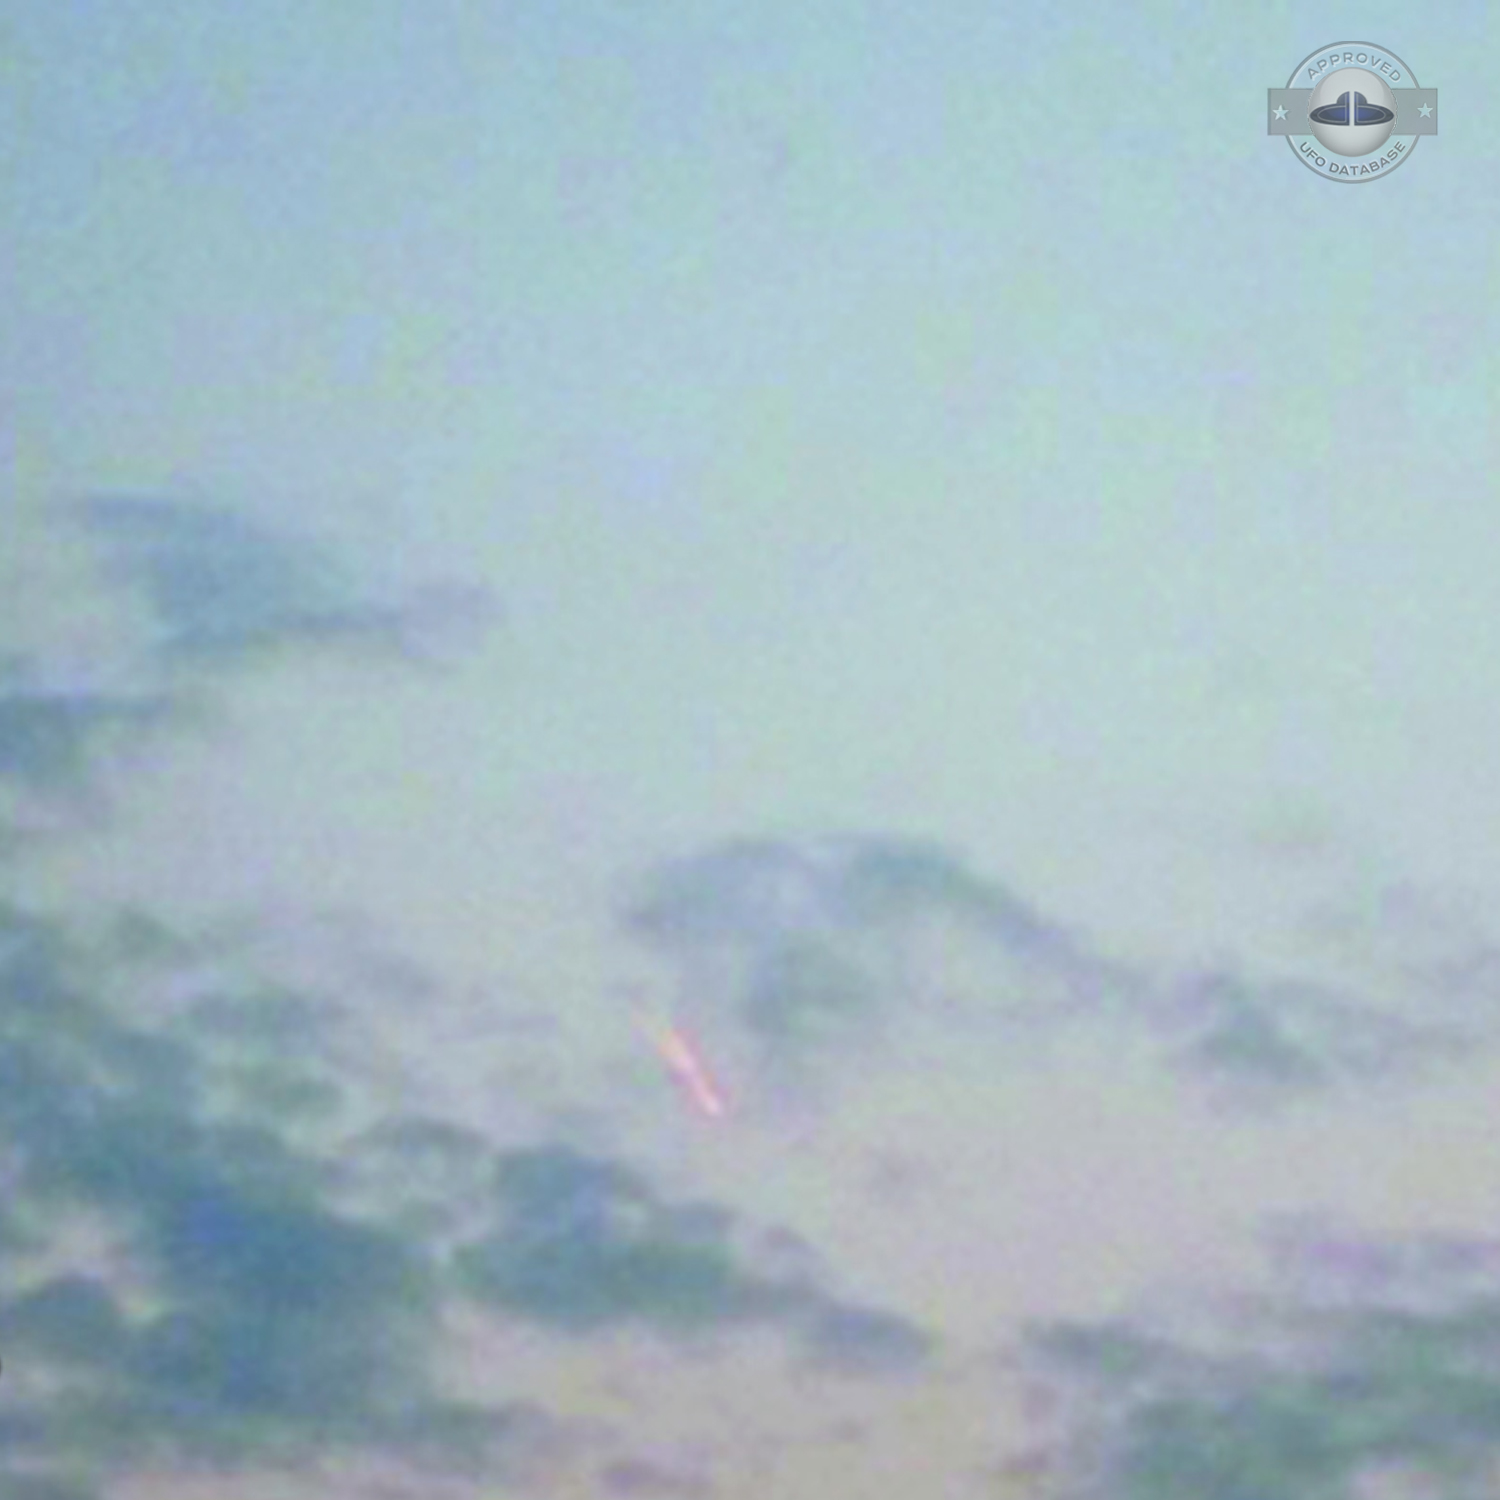 Fire Dragon UFO with glowing tail in clouds over Hefei China | 2011 UFO Picture #234-2